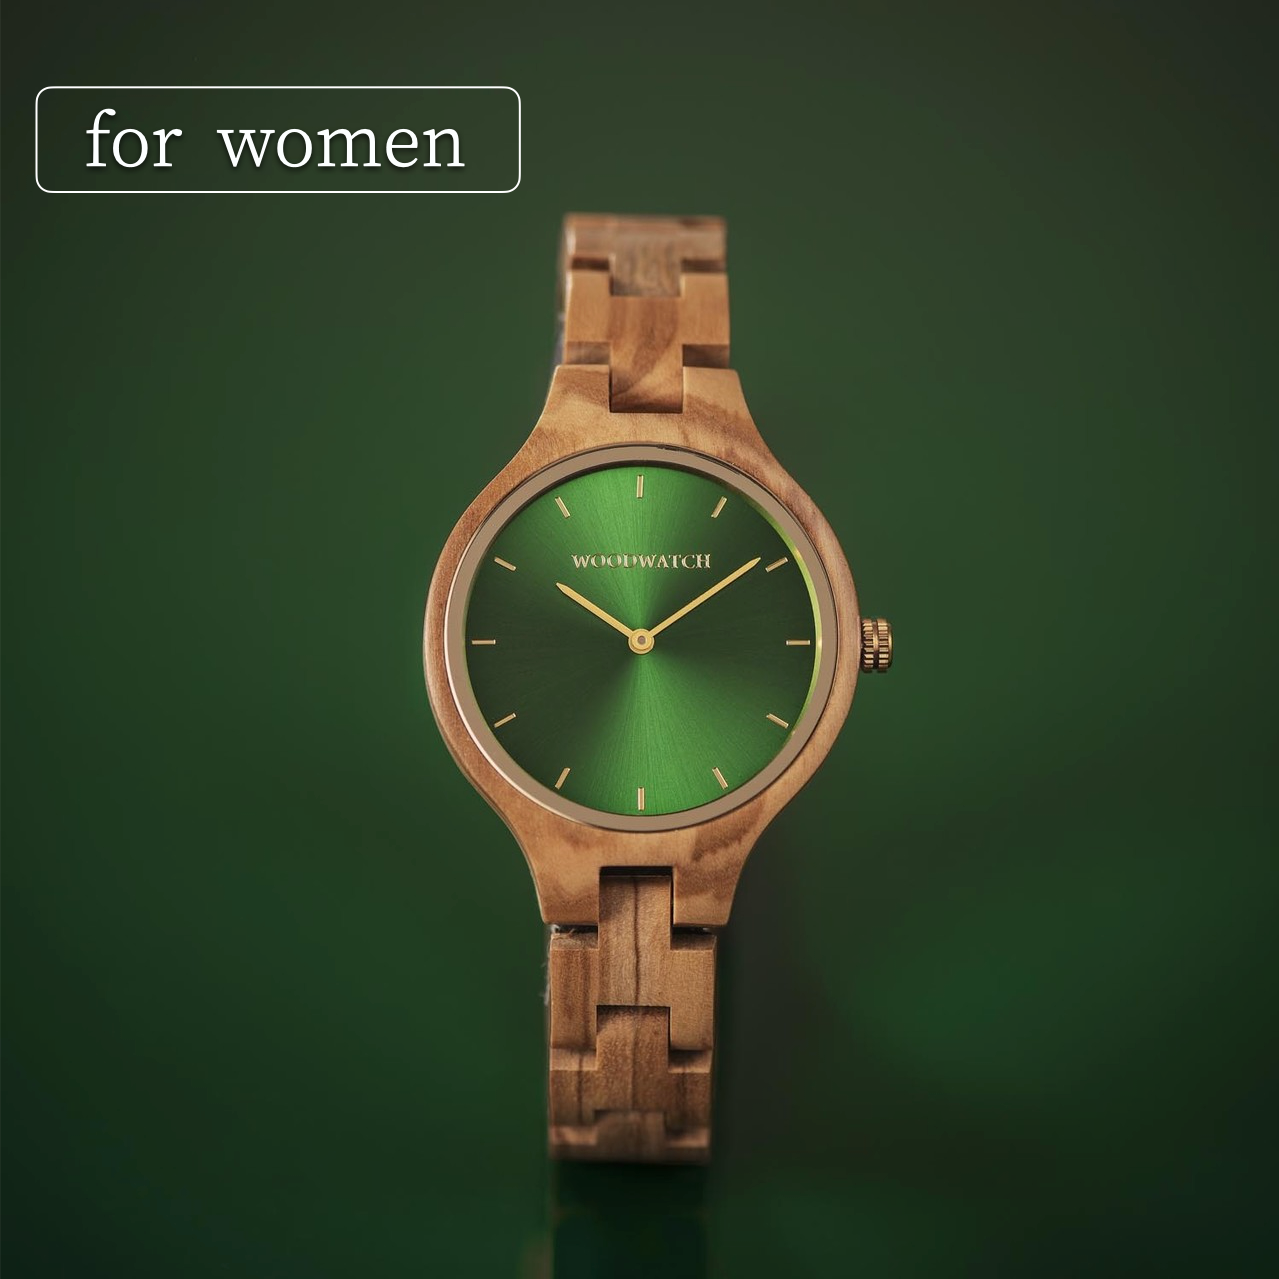 Hill（ヒル）- AURORA collection / WoodWatch